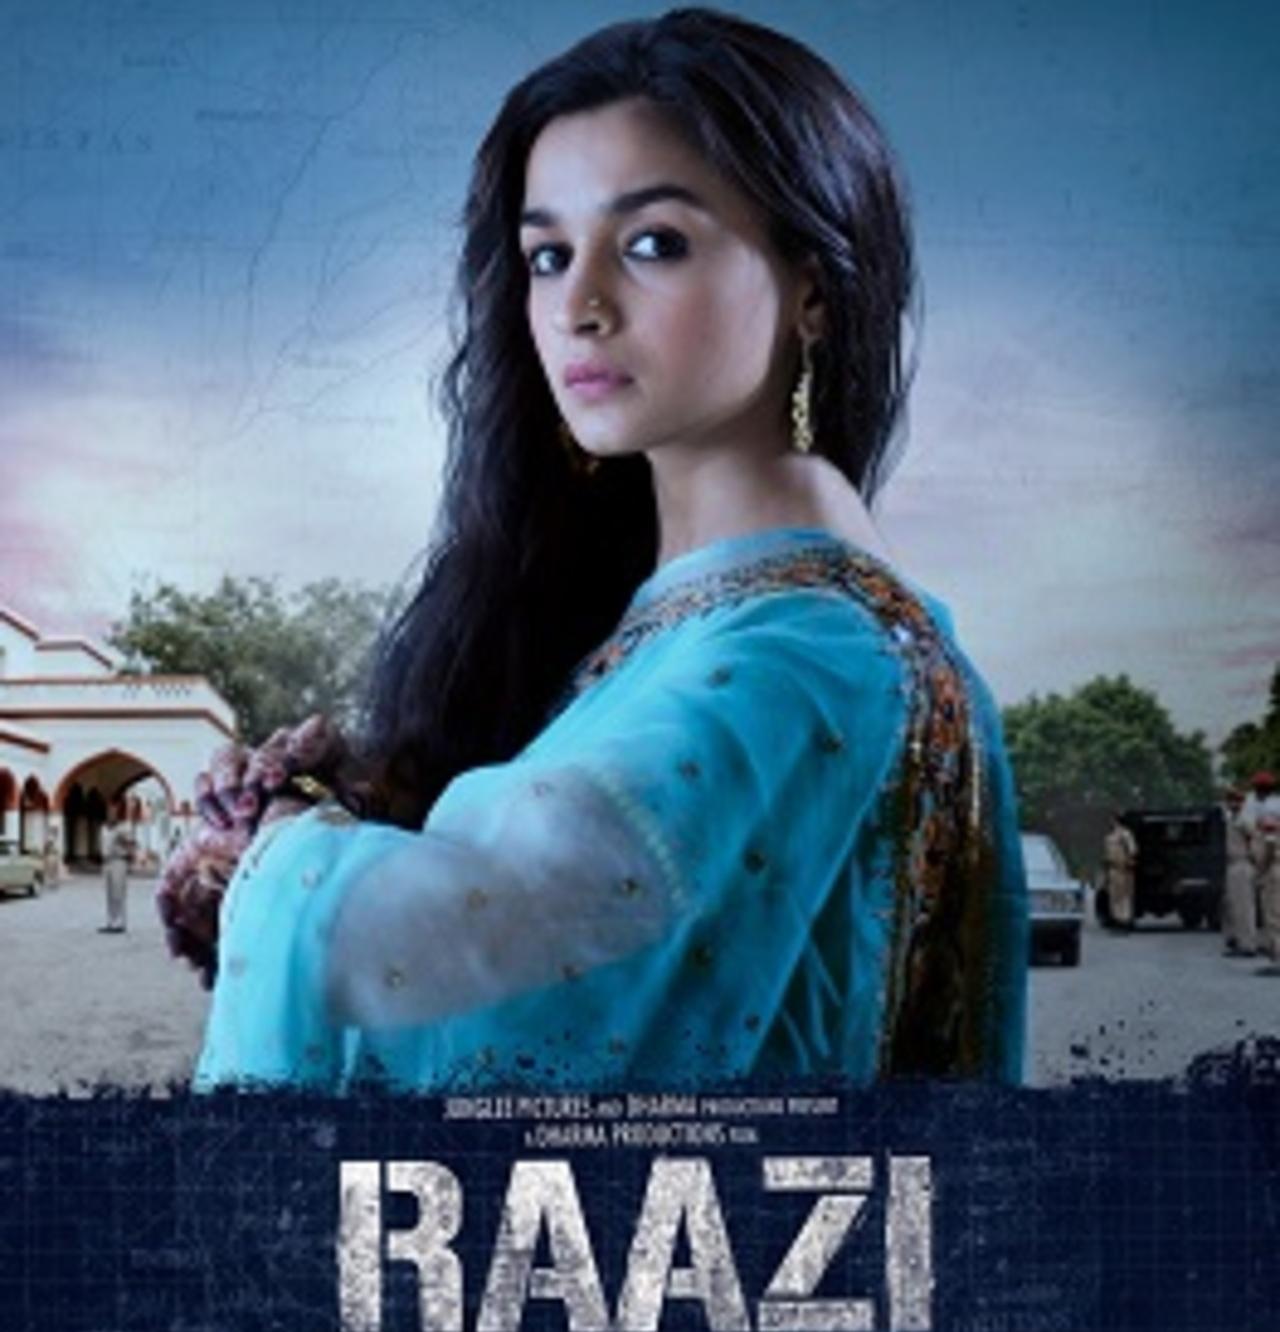 ‘Ae Watan’ is a soul-stirring Hindi song from the 2018 Bollywood film ‘Raazi’. The film was directed by Meghna Gulzar and is based on the novel 